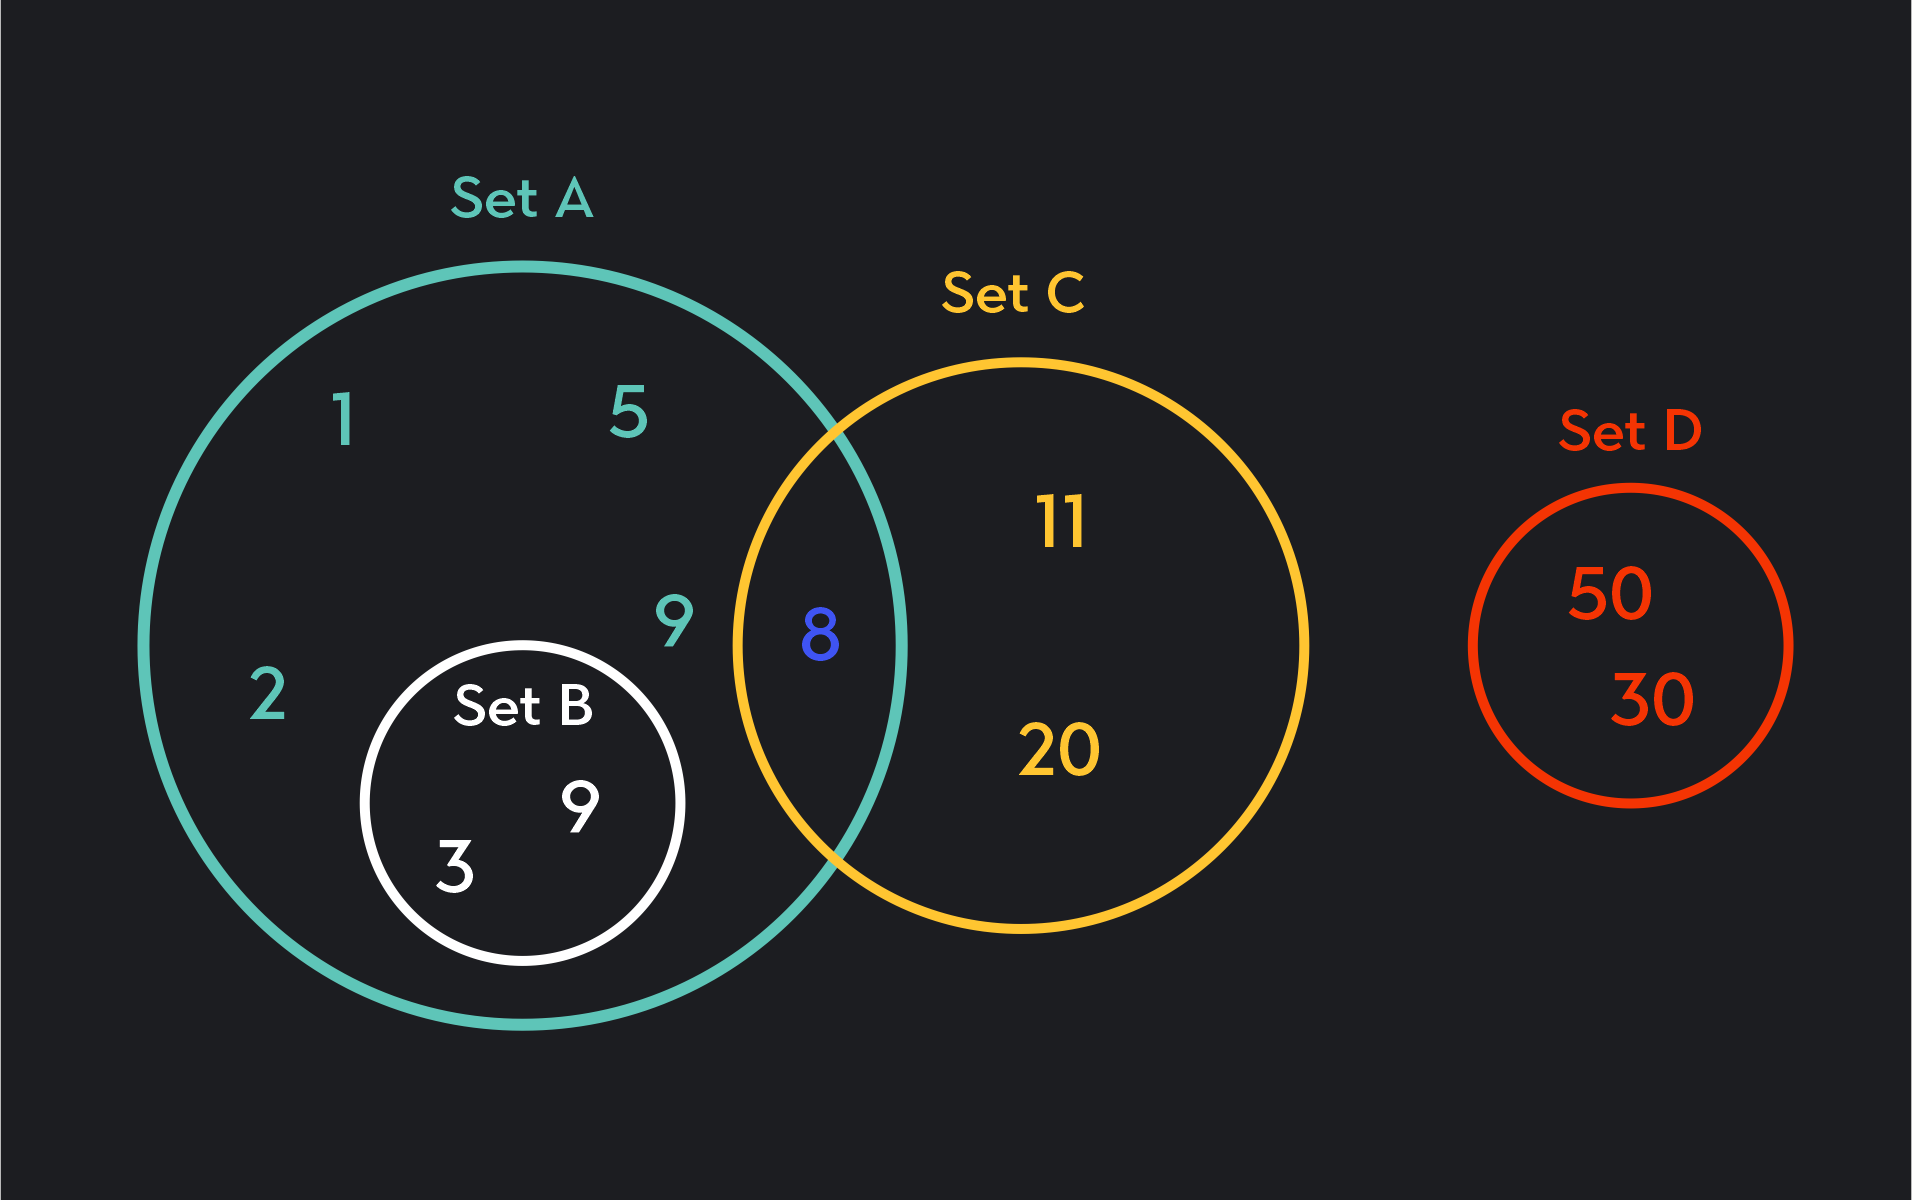 Graph showing sets and subsets in a venn diagram